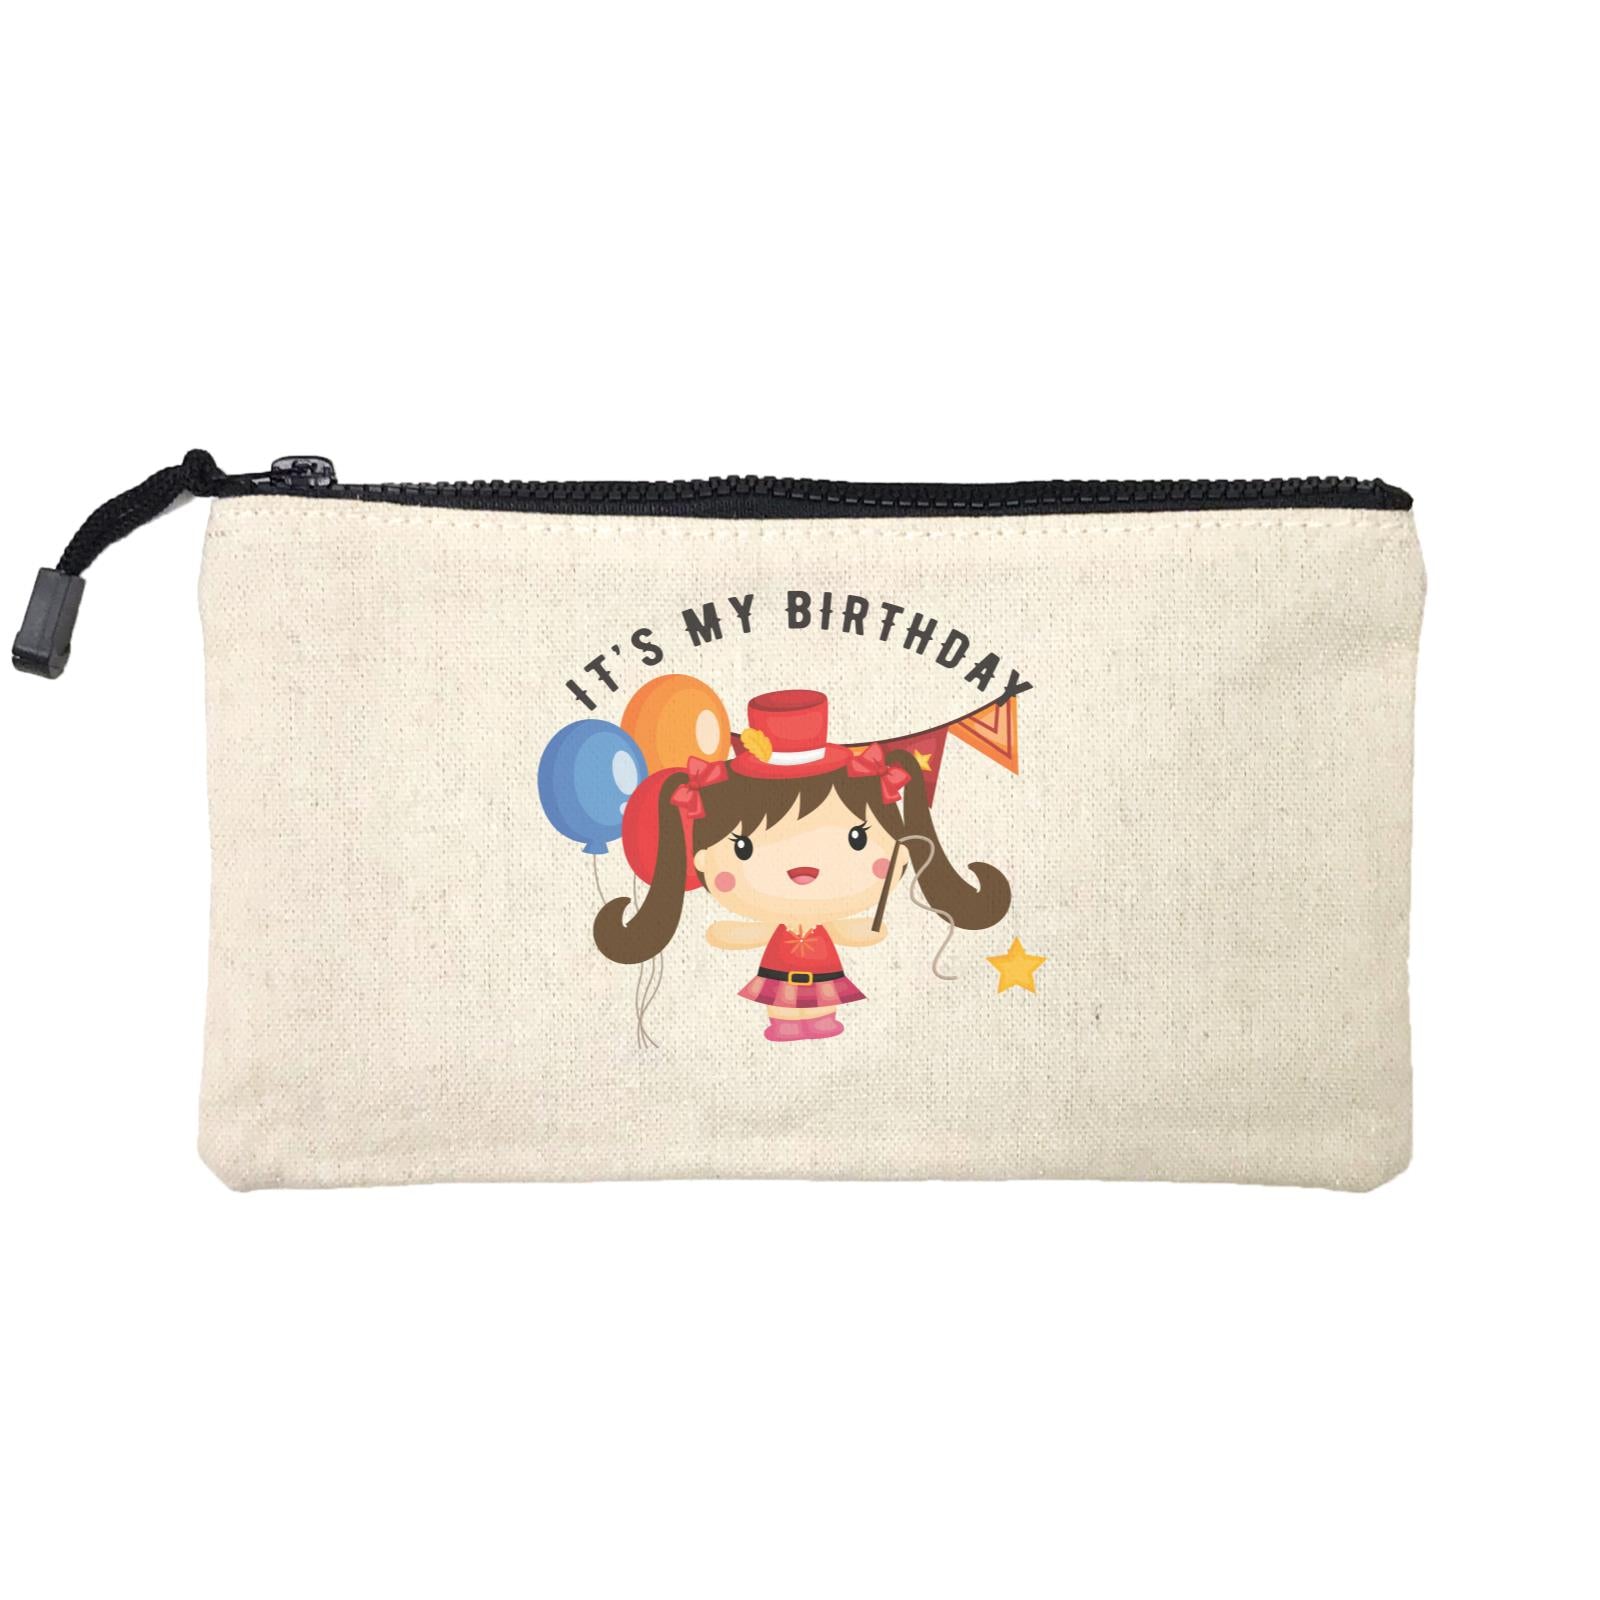 Birthday Circus Happy Girl Leader of Performance It's My Birthday Addname Mini Accessories Stationery Pouch